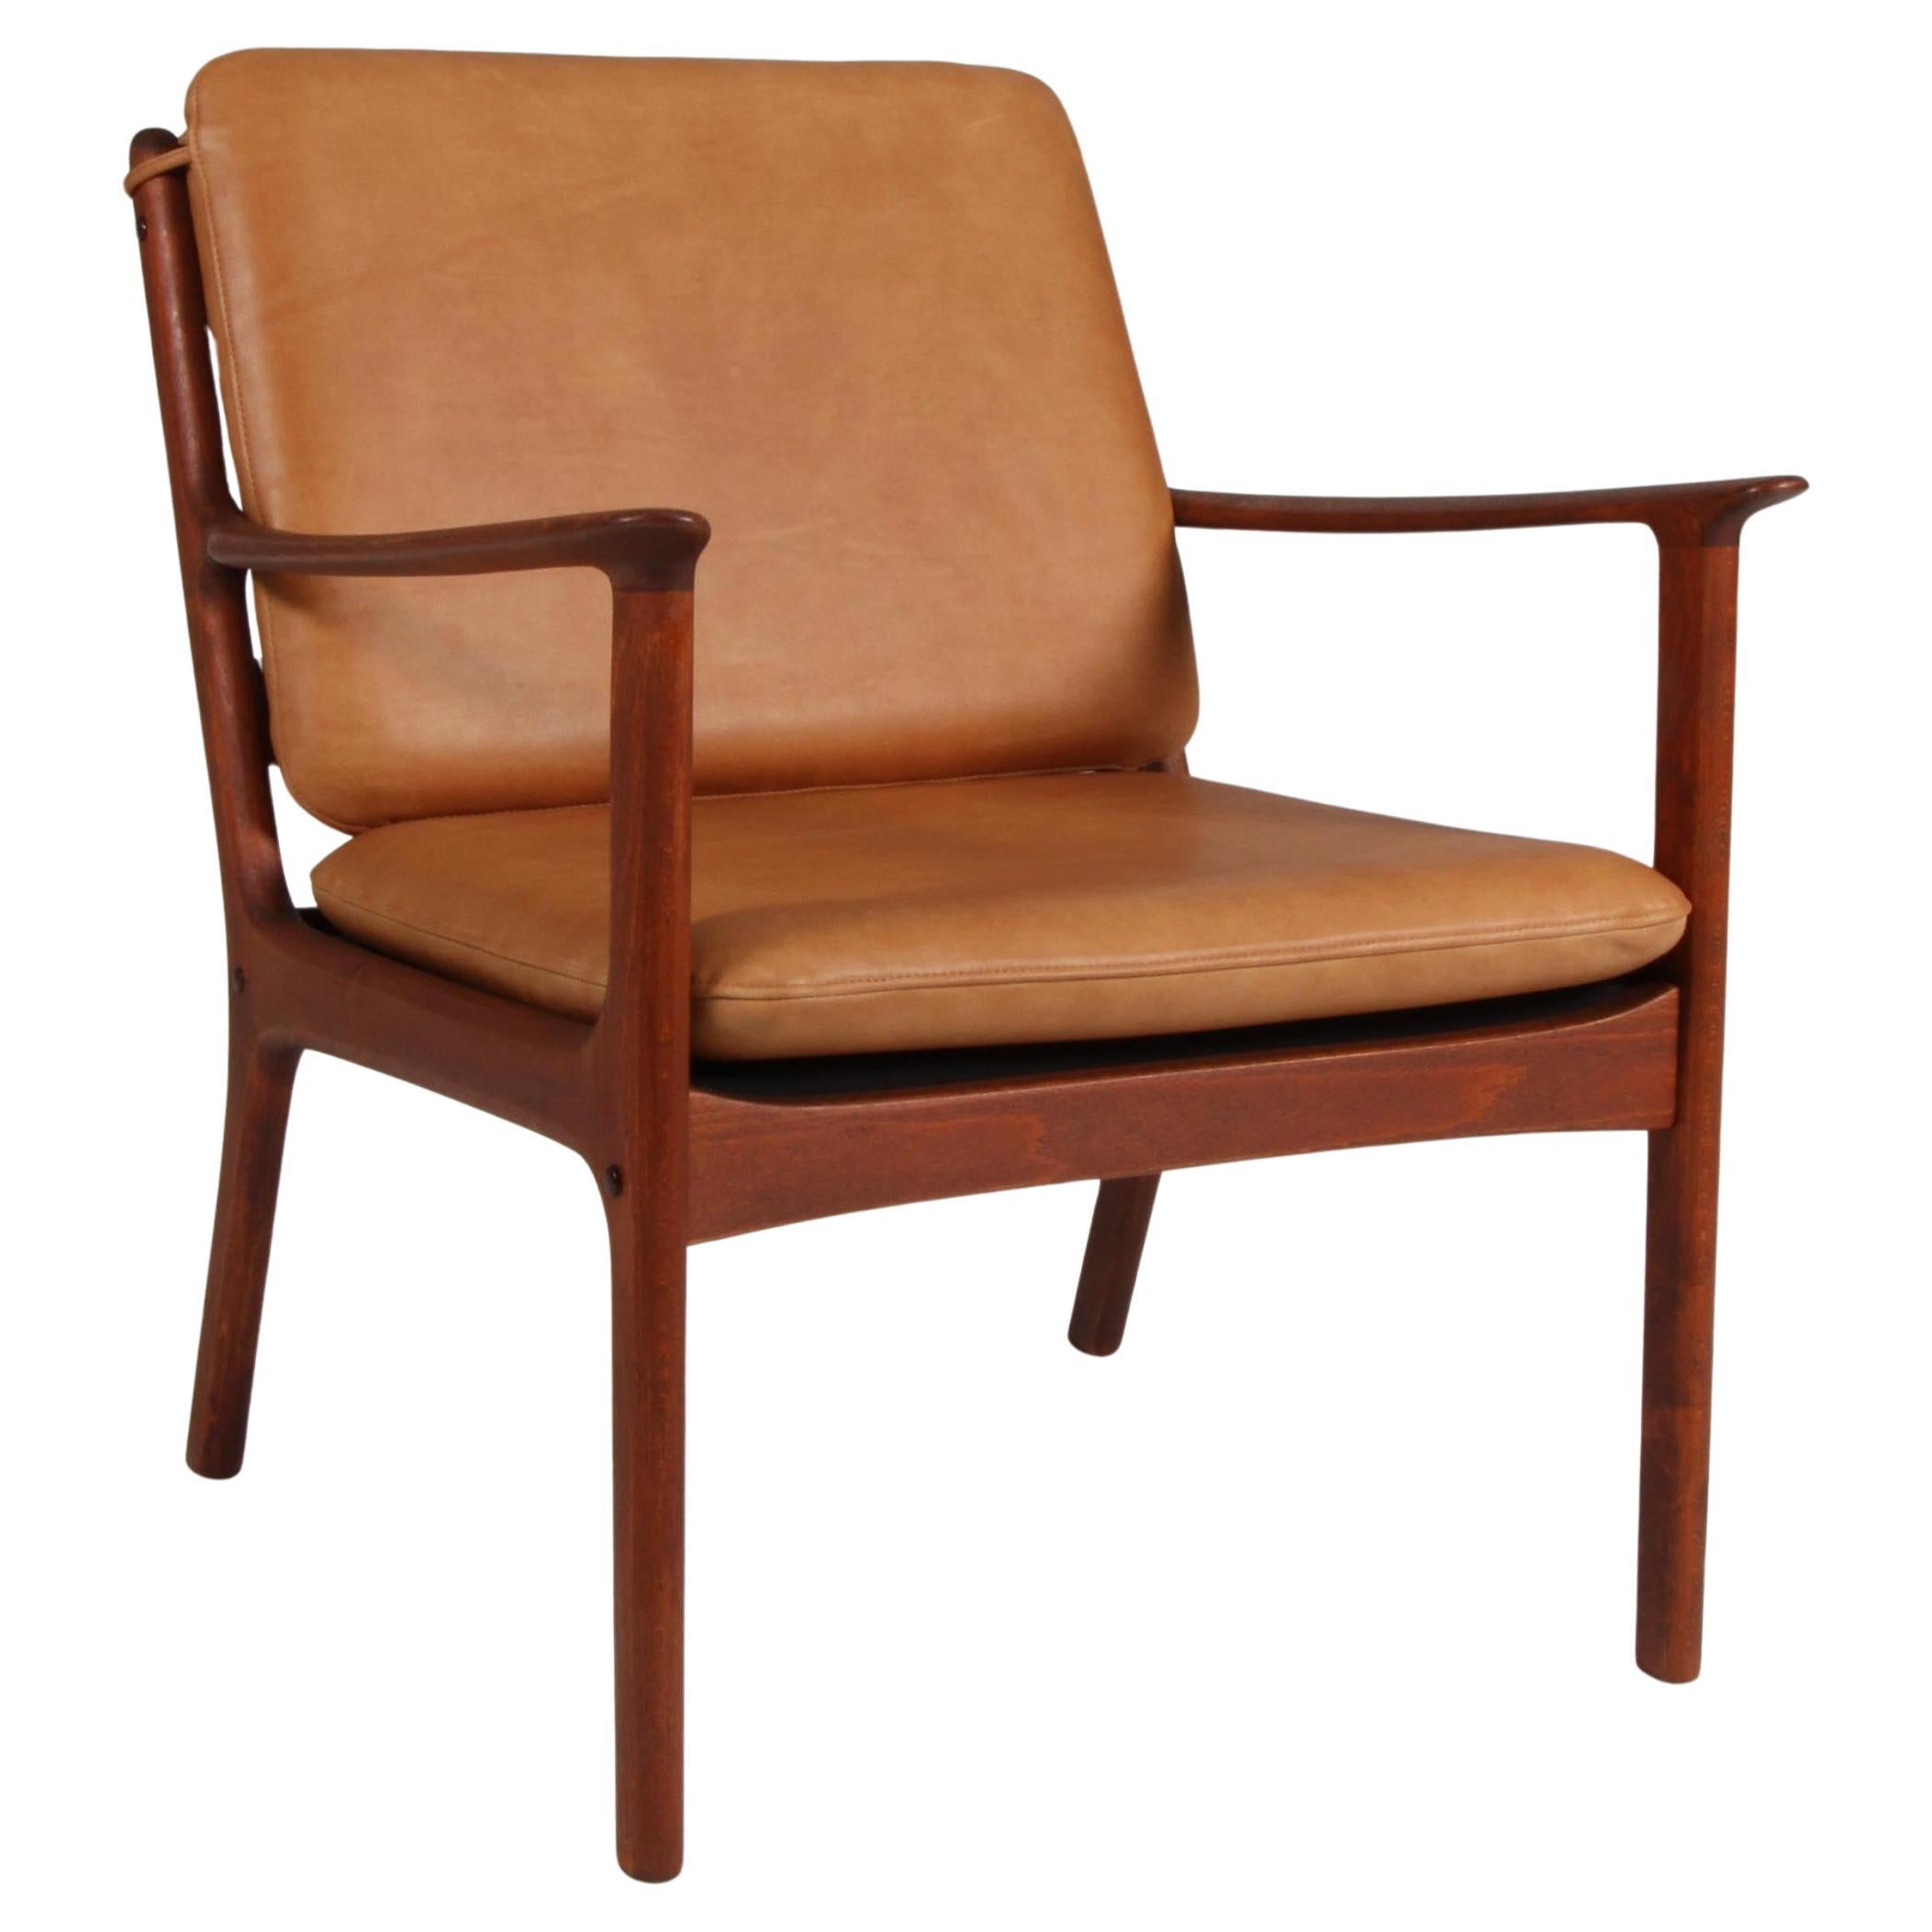 Ole Wanscher Lounge Chairs, Model PJ112, Cognac Aniline Leather, stained beech For Sale